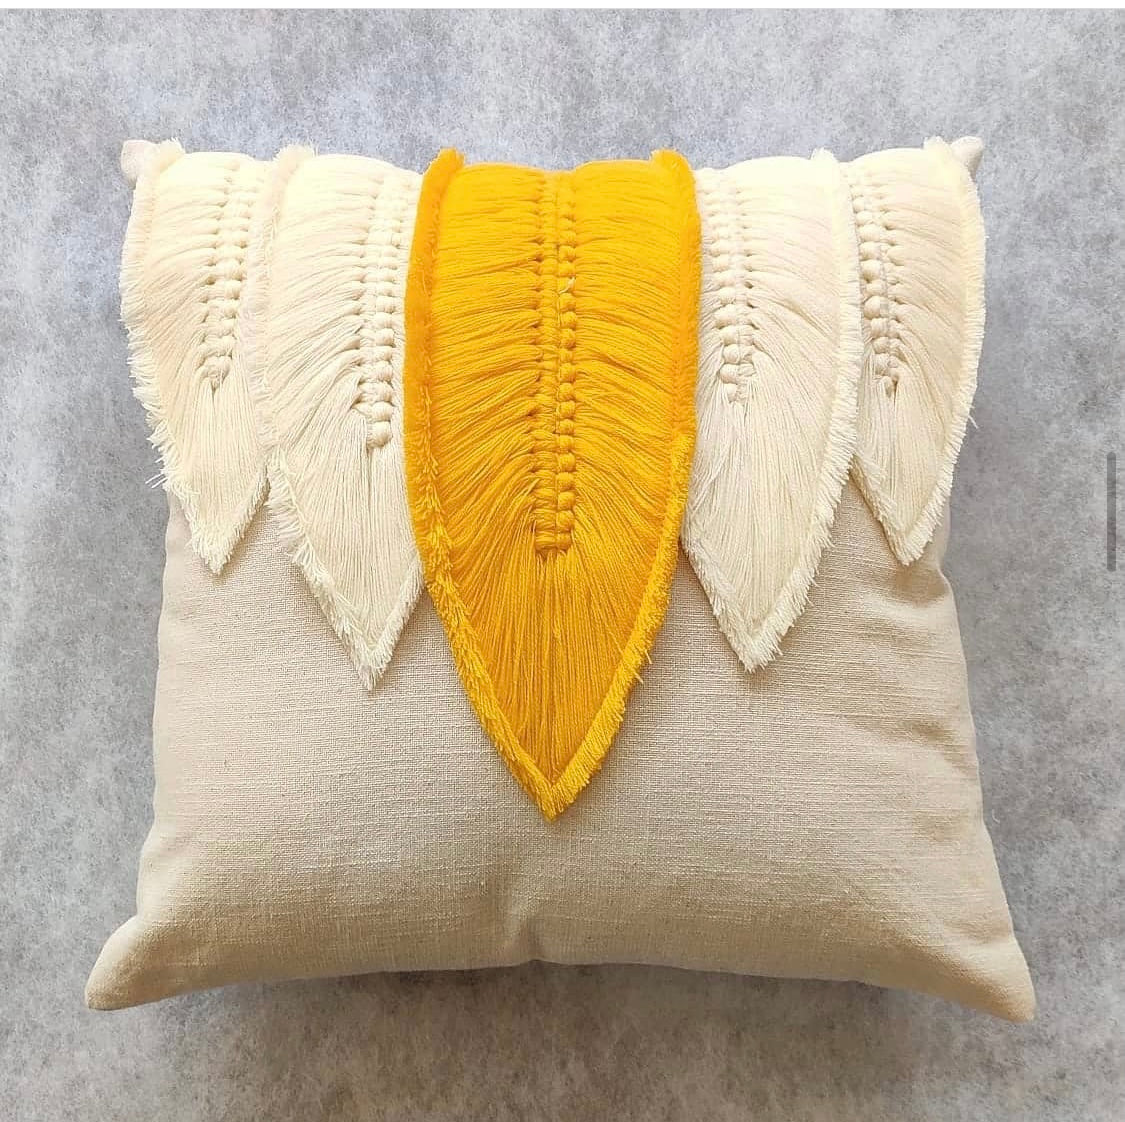 Embellished 5 feathers Cushion Cover- 18*18 inches